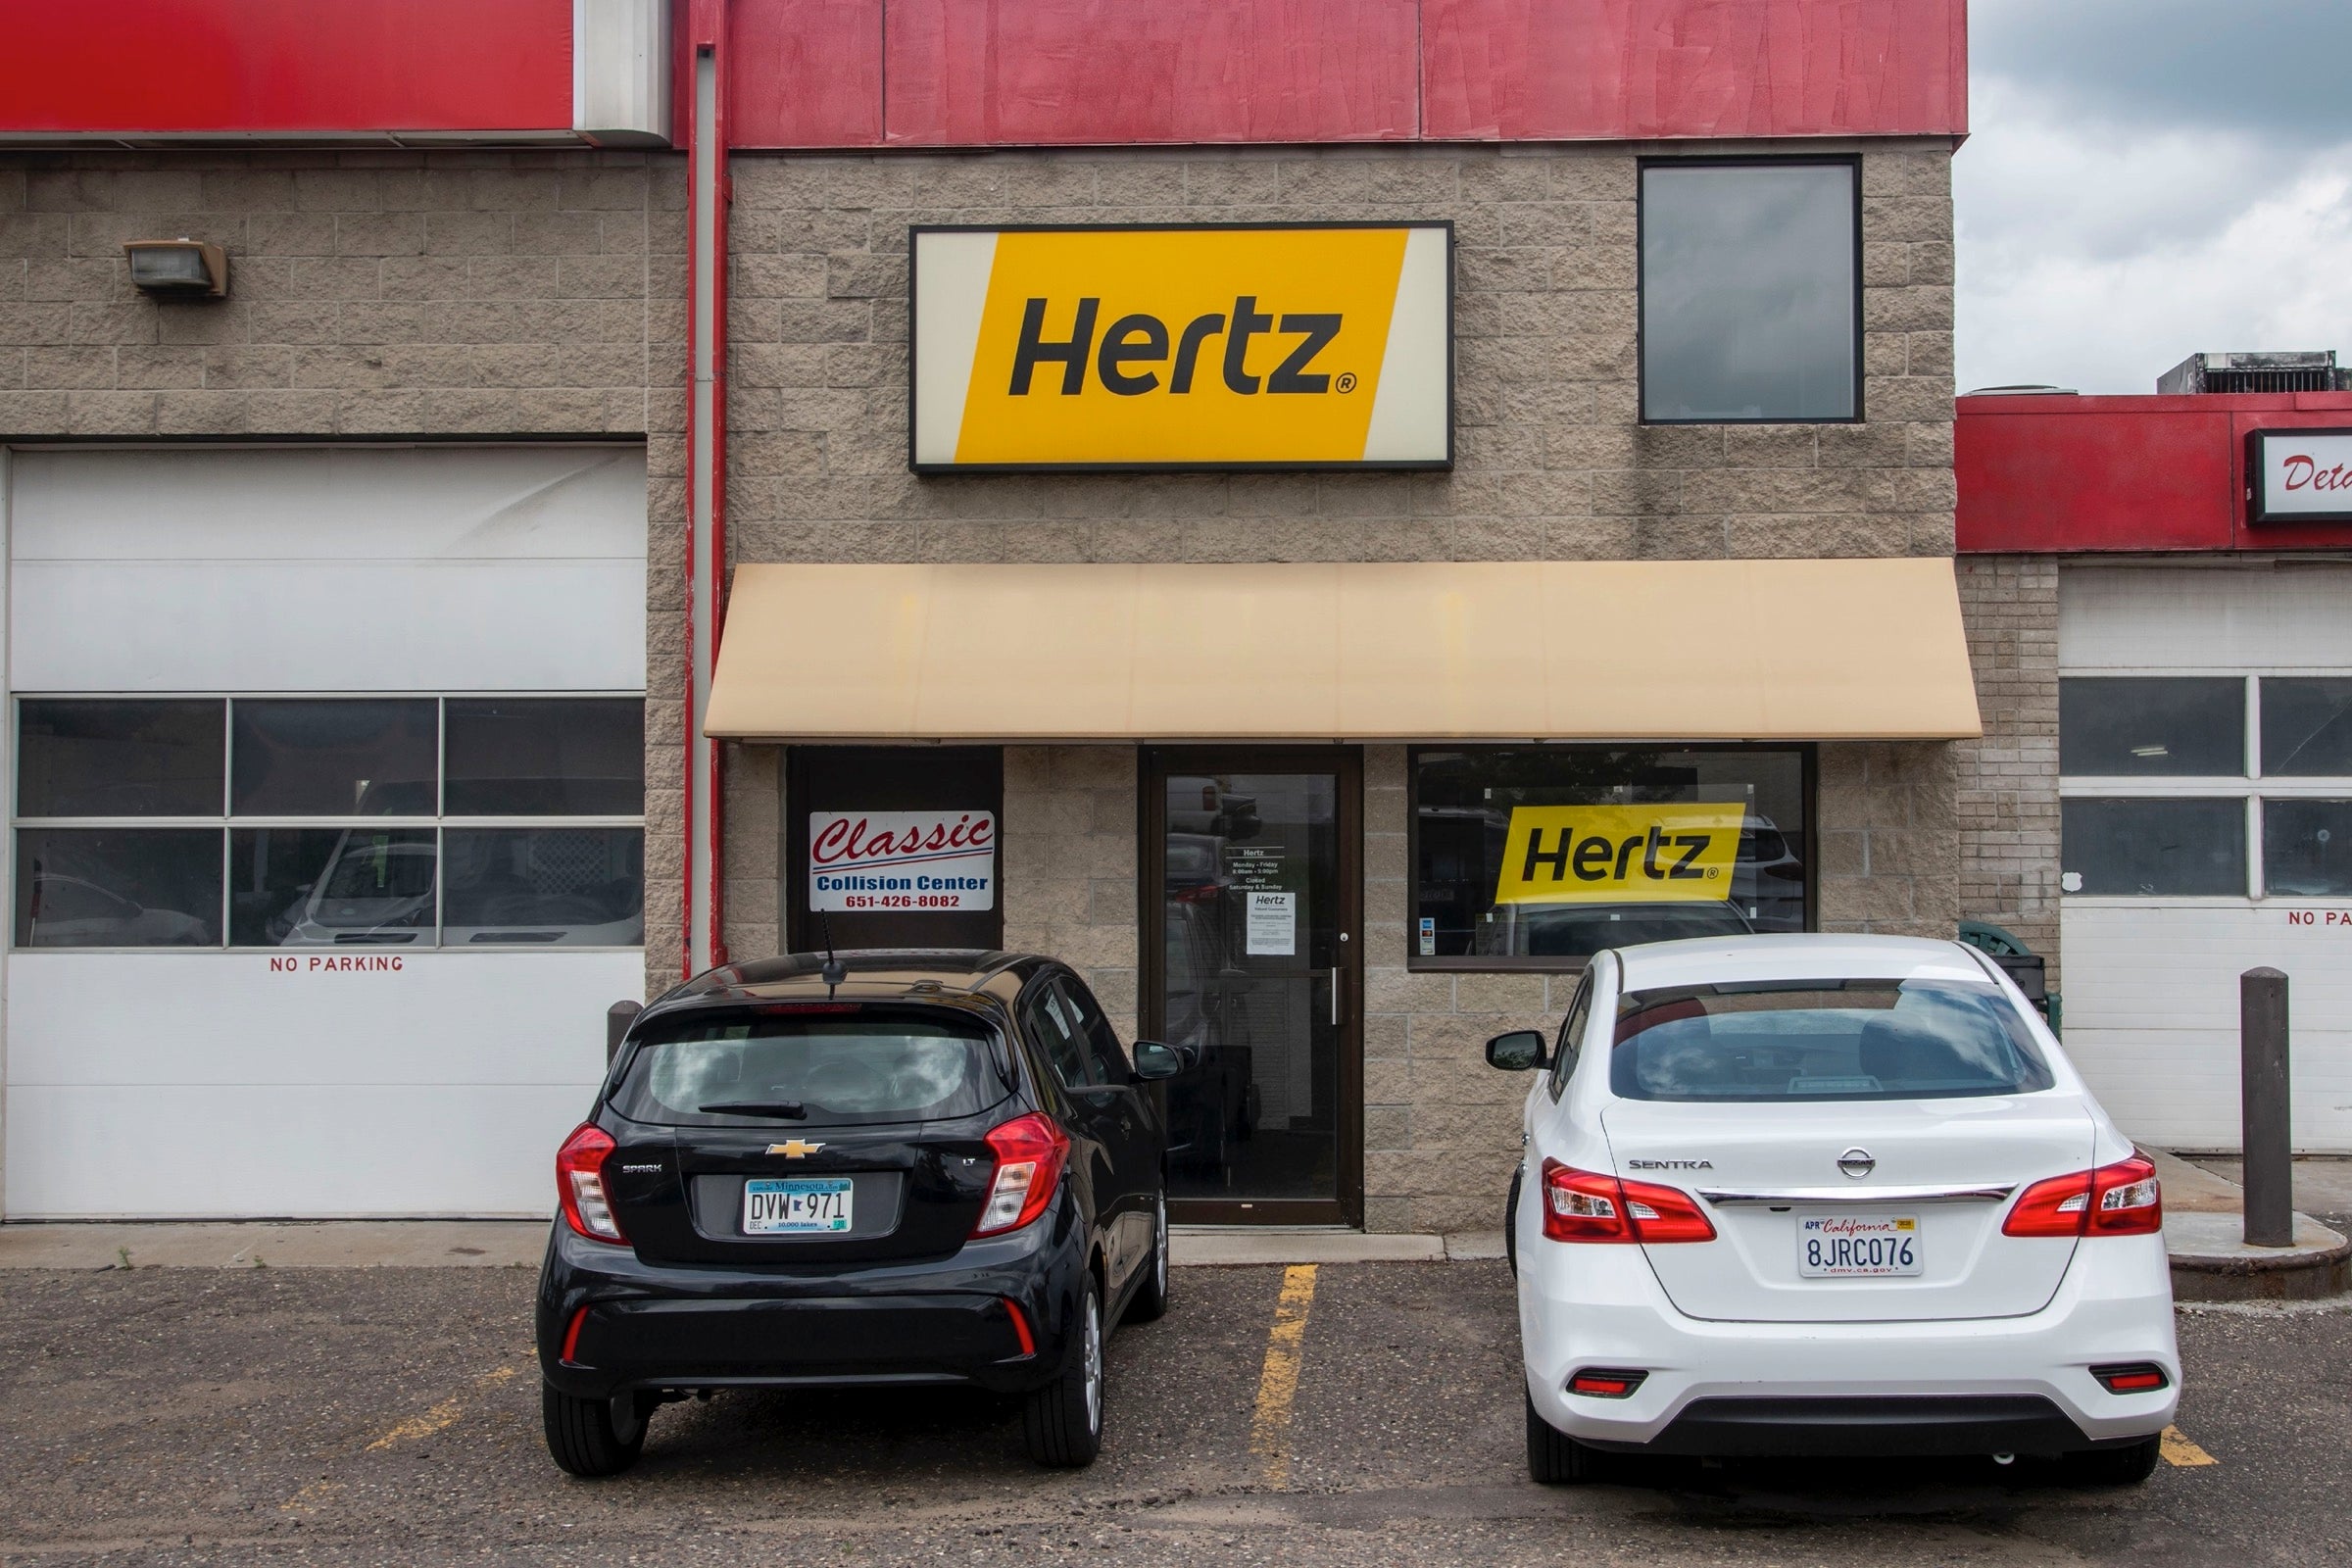 Young-driver fees waived for new graduates on Hertz rentals Two cars in front of a Hertz sign in a parking lot